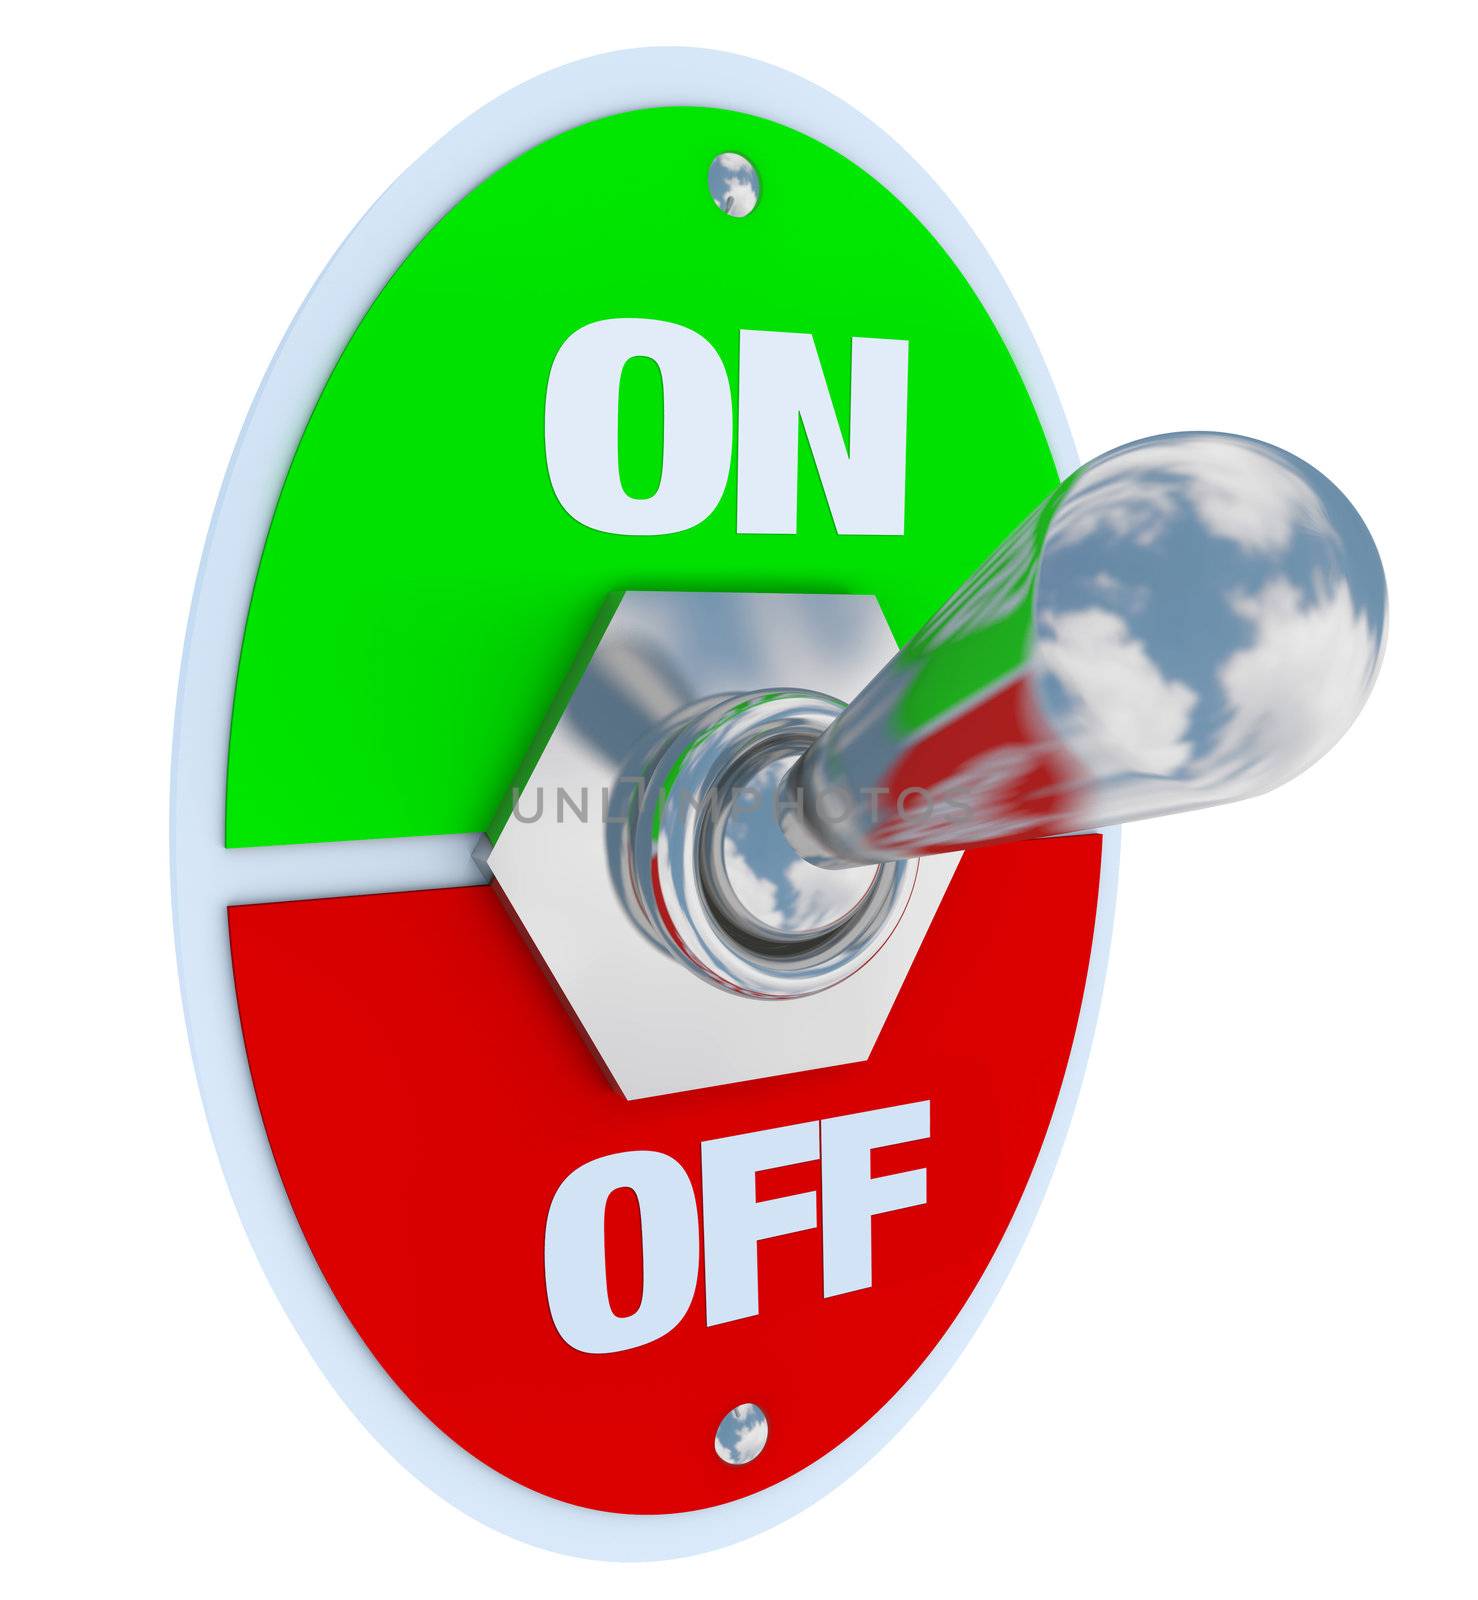 On and Off - Toggle Switch by iQoncept